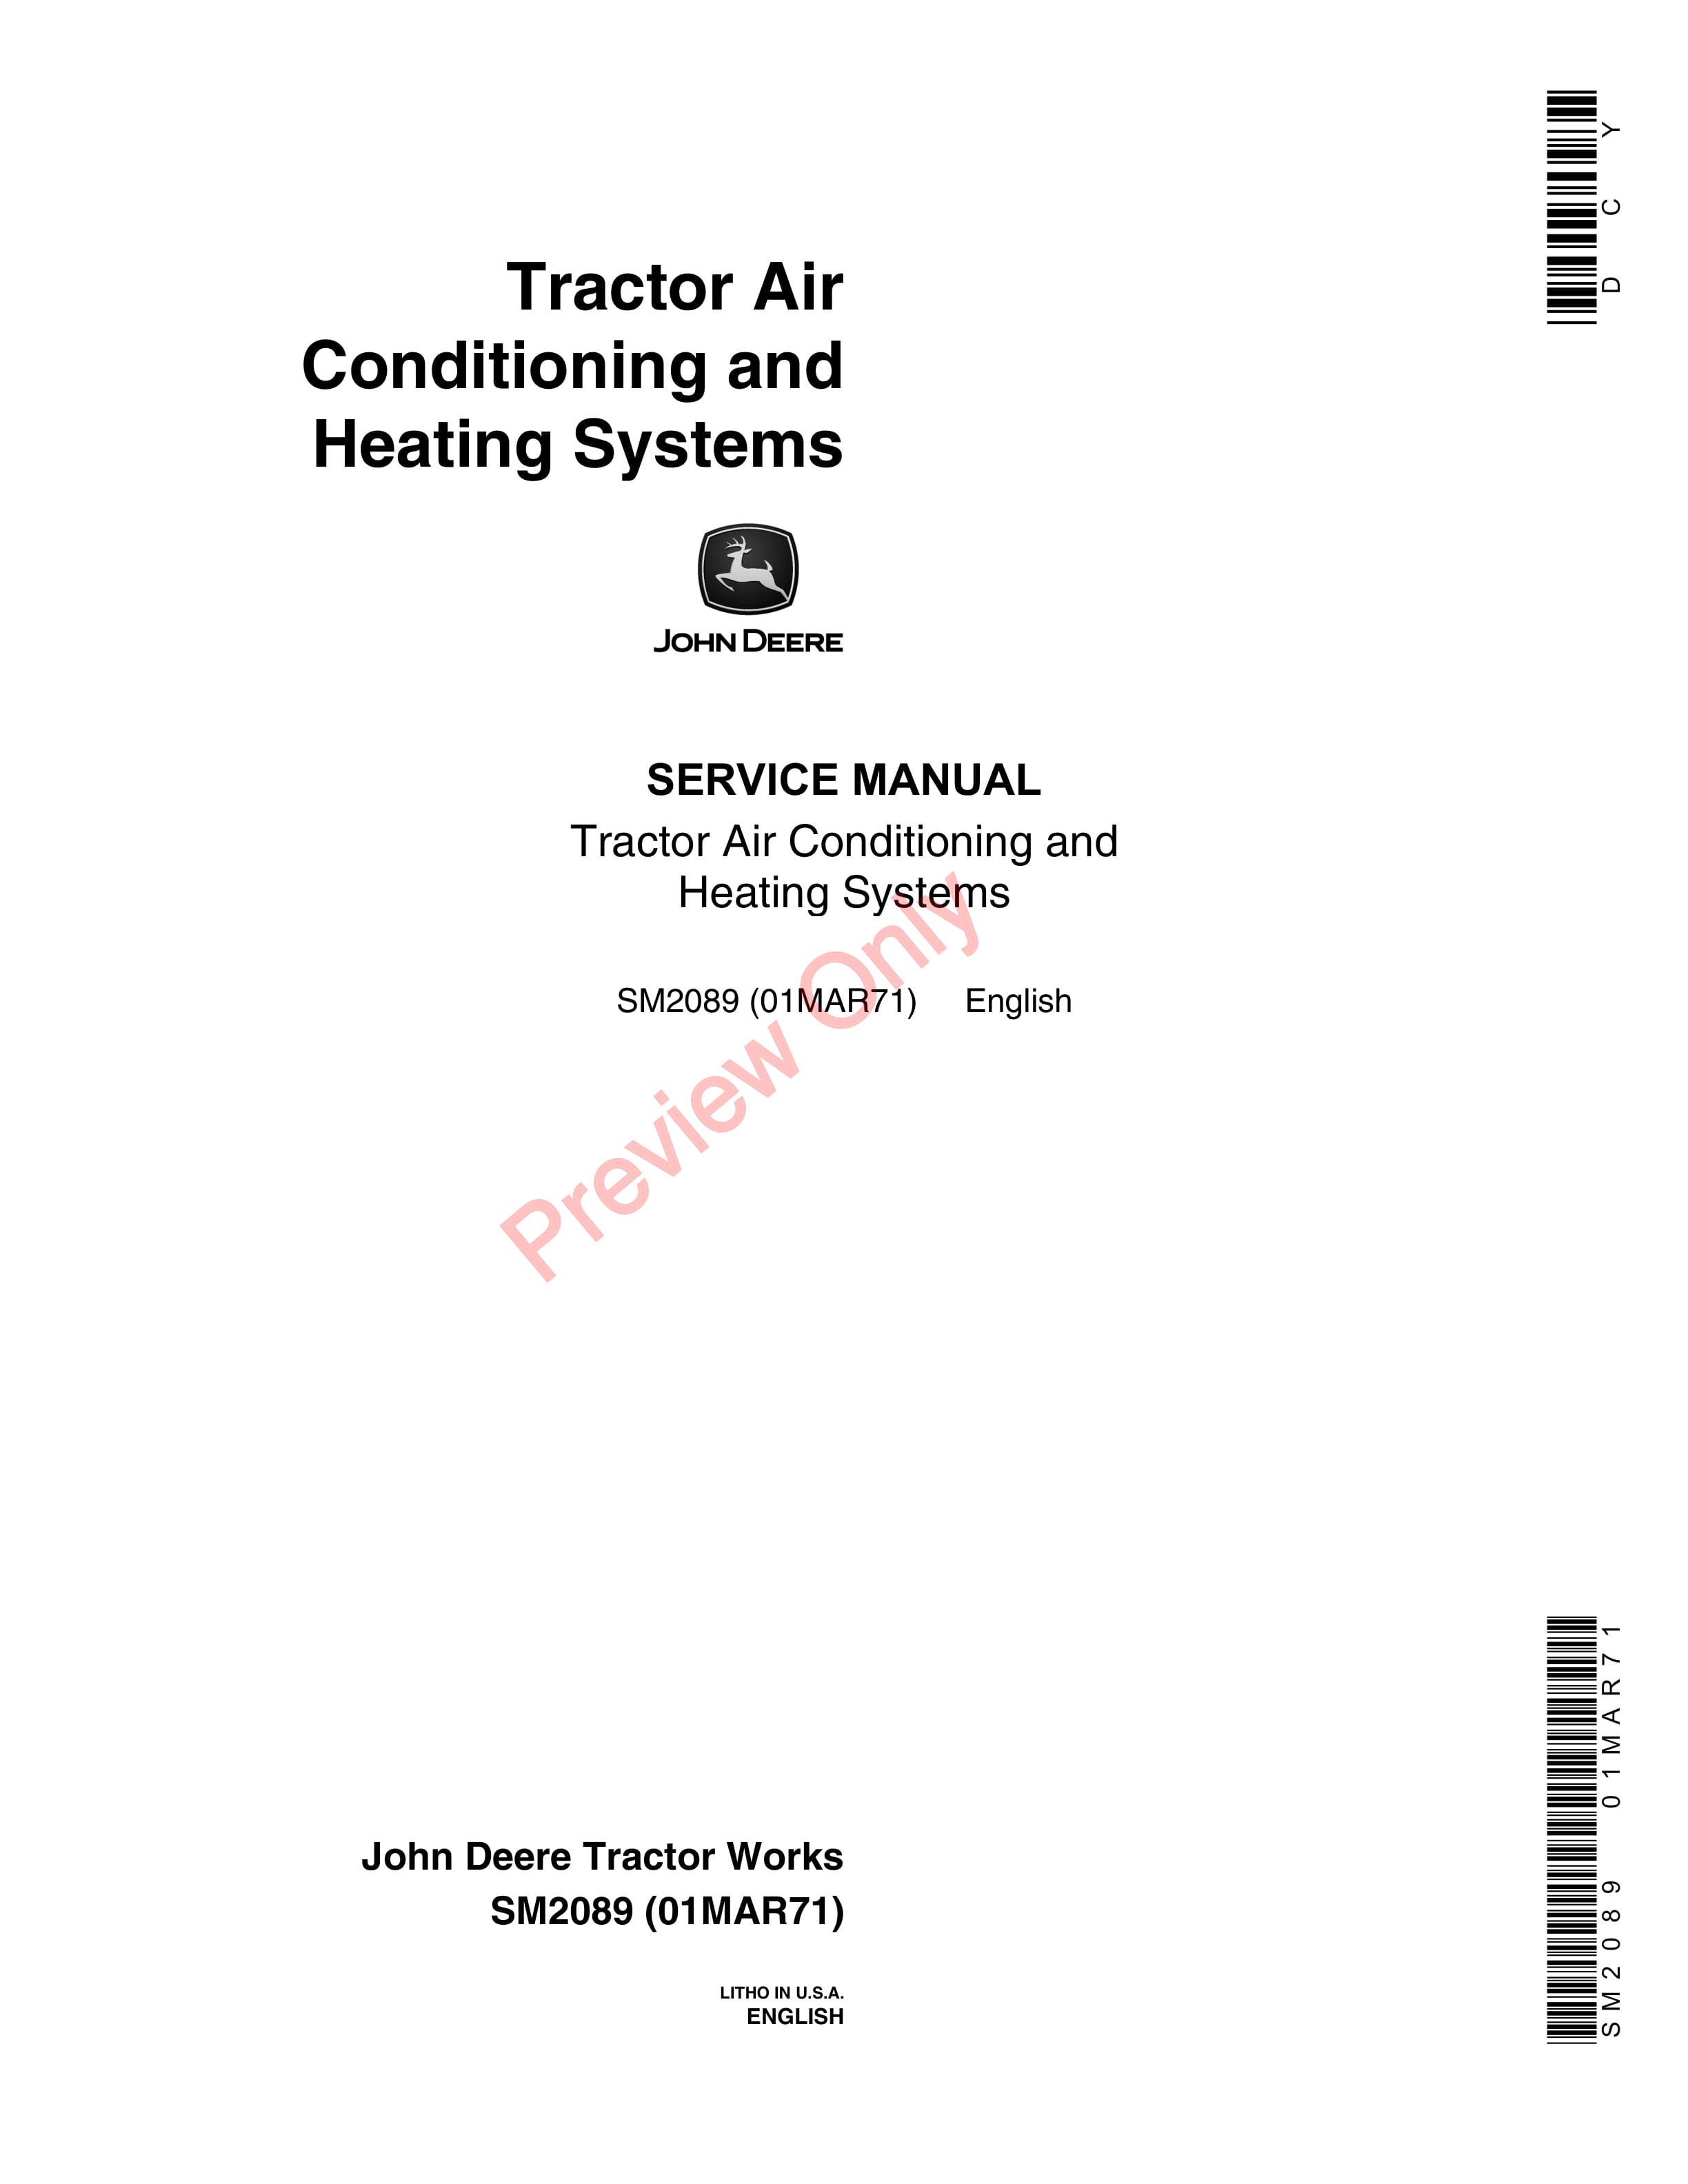 John Deere Tractor Air Conditioner and Heating Systems Service Manual SM2089 01MAR71-1